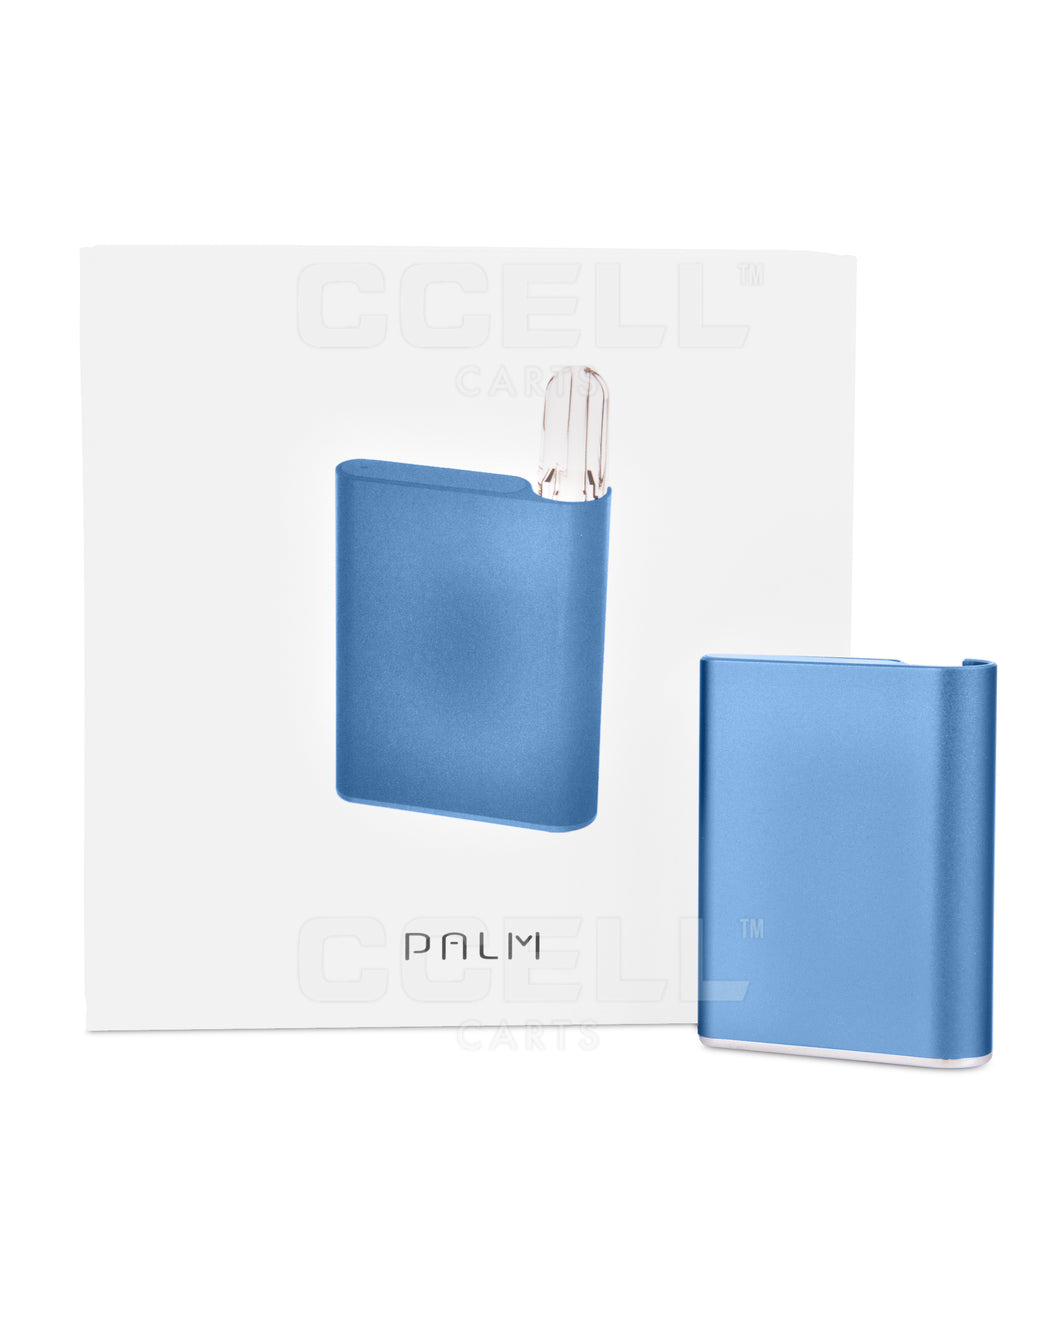 CCELL Palm Power Battery 550mAh - Blue